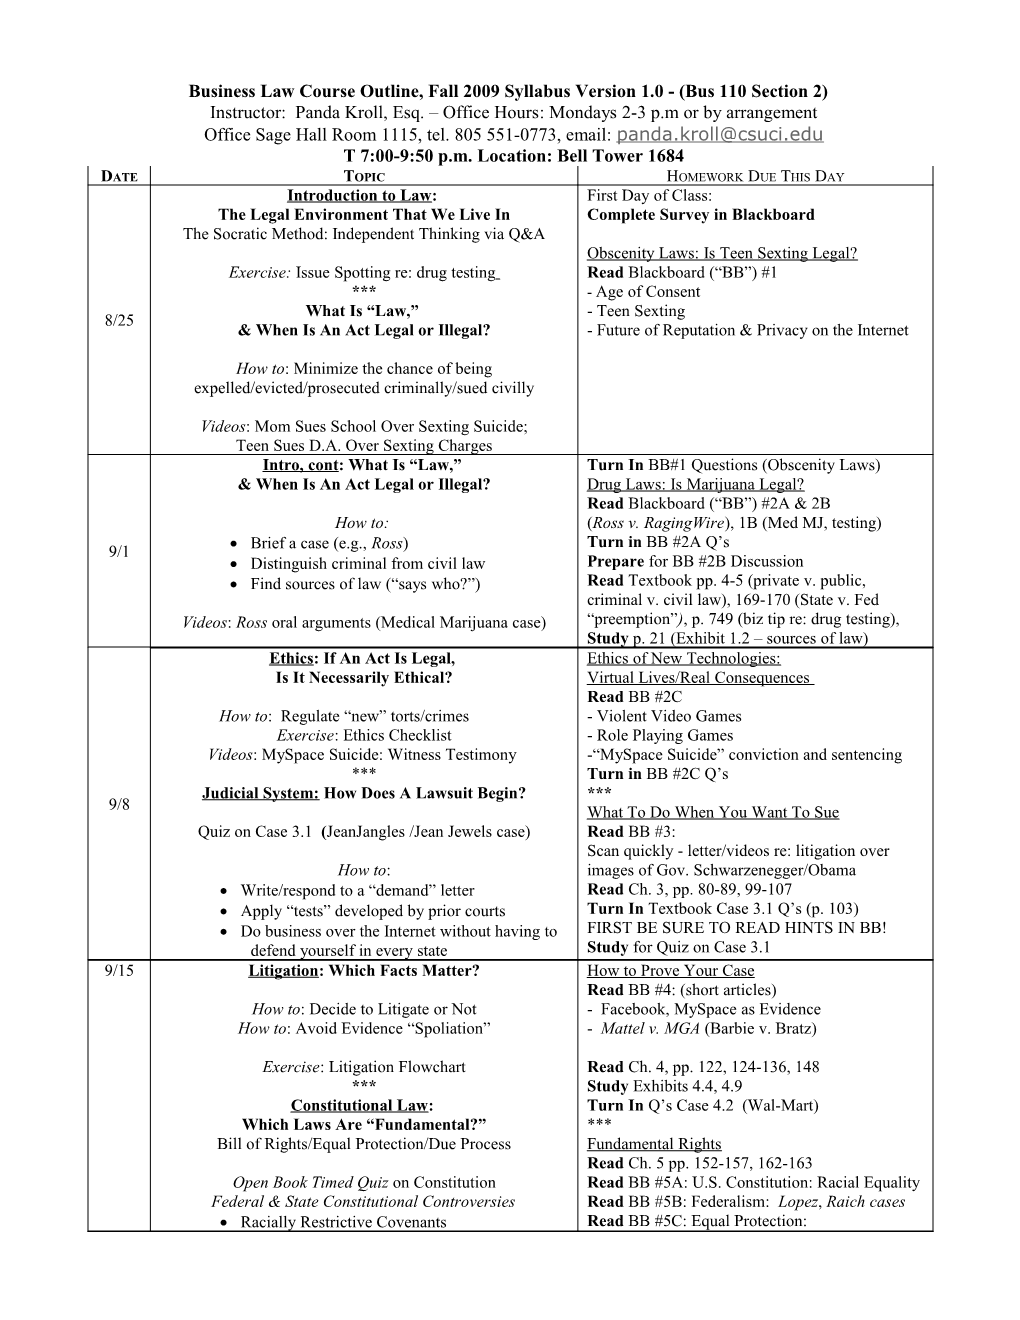 Business Law Course Outline, Spring 2009 Syllabus Version 1